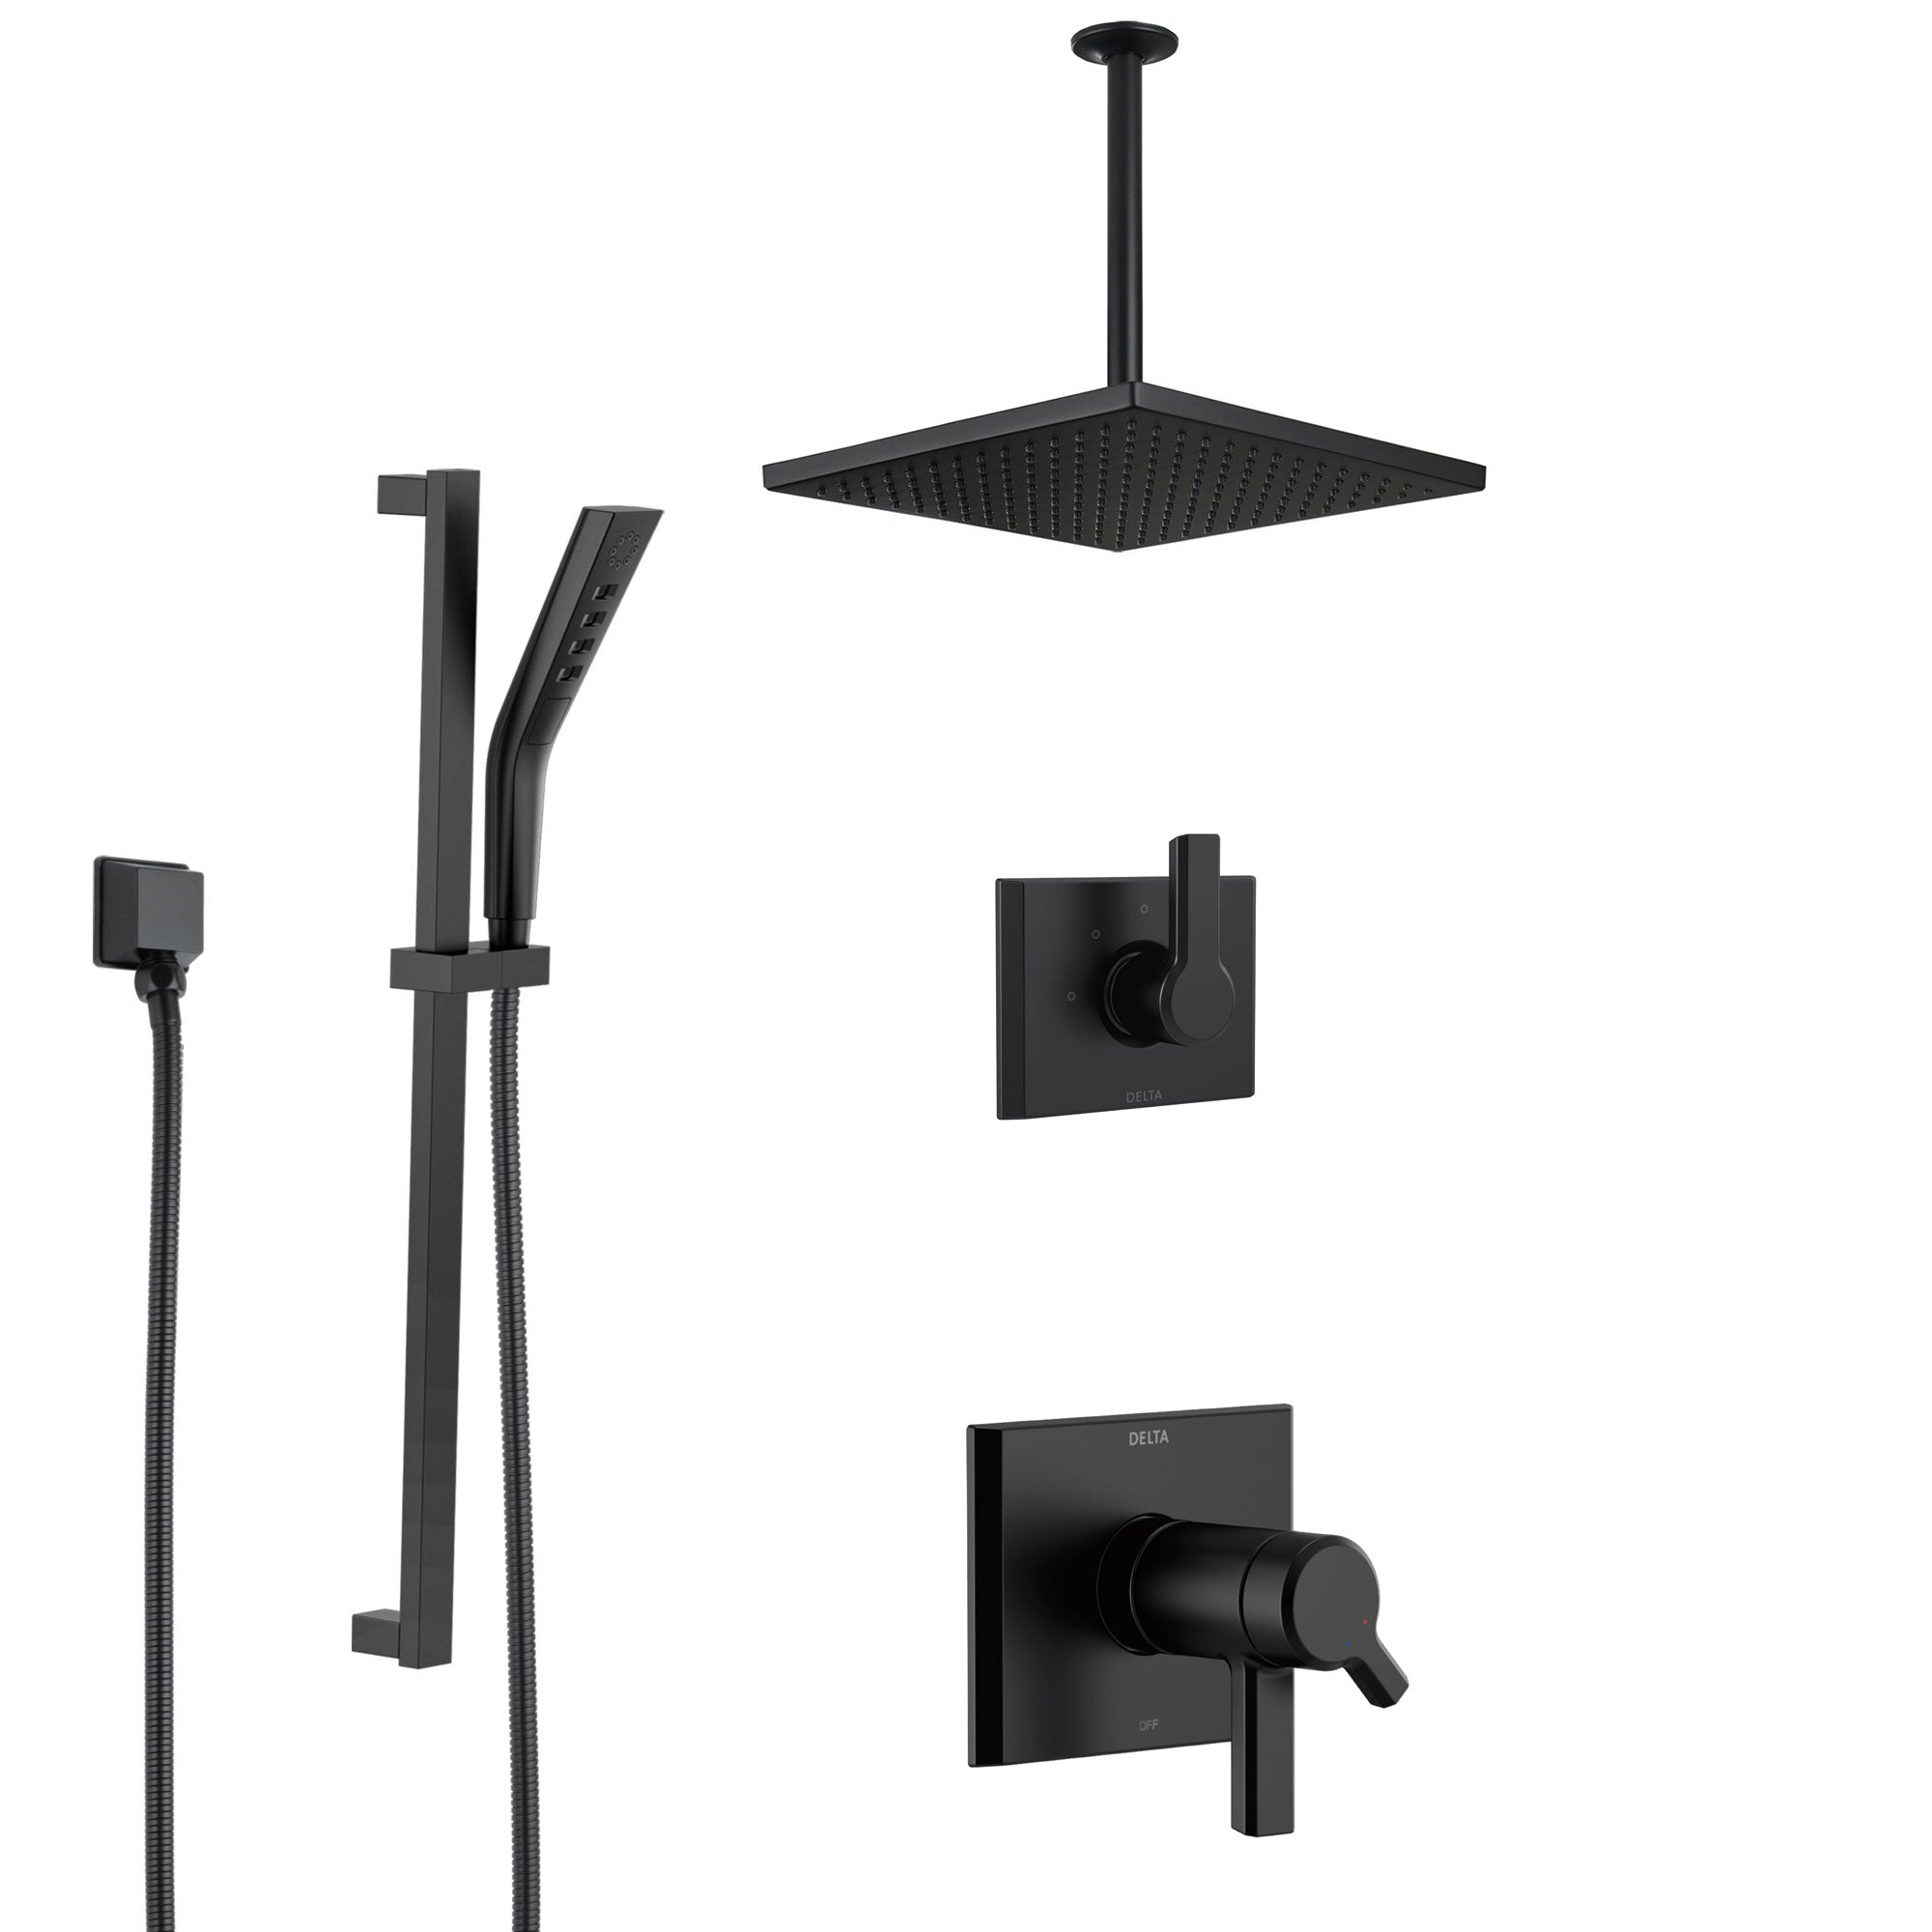 Delta Pivotal Matte Black Finish Thermostatic Square Shower Diverter System Large Rain Ceiling Showerhead and Hand Spray with Slidebar SS17T993BL2